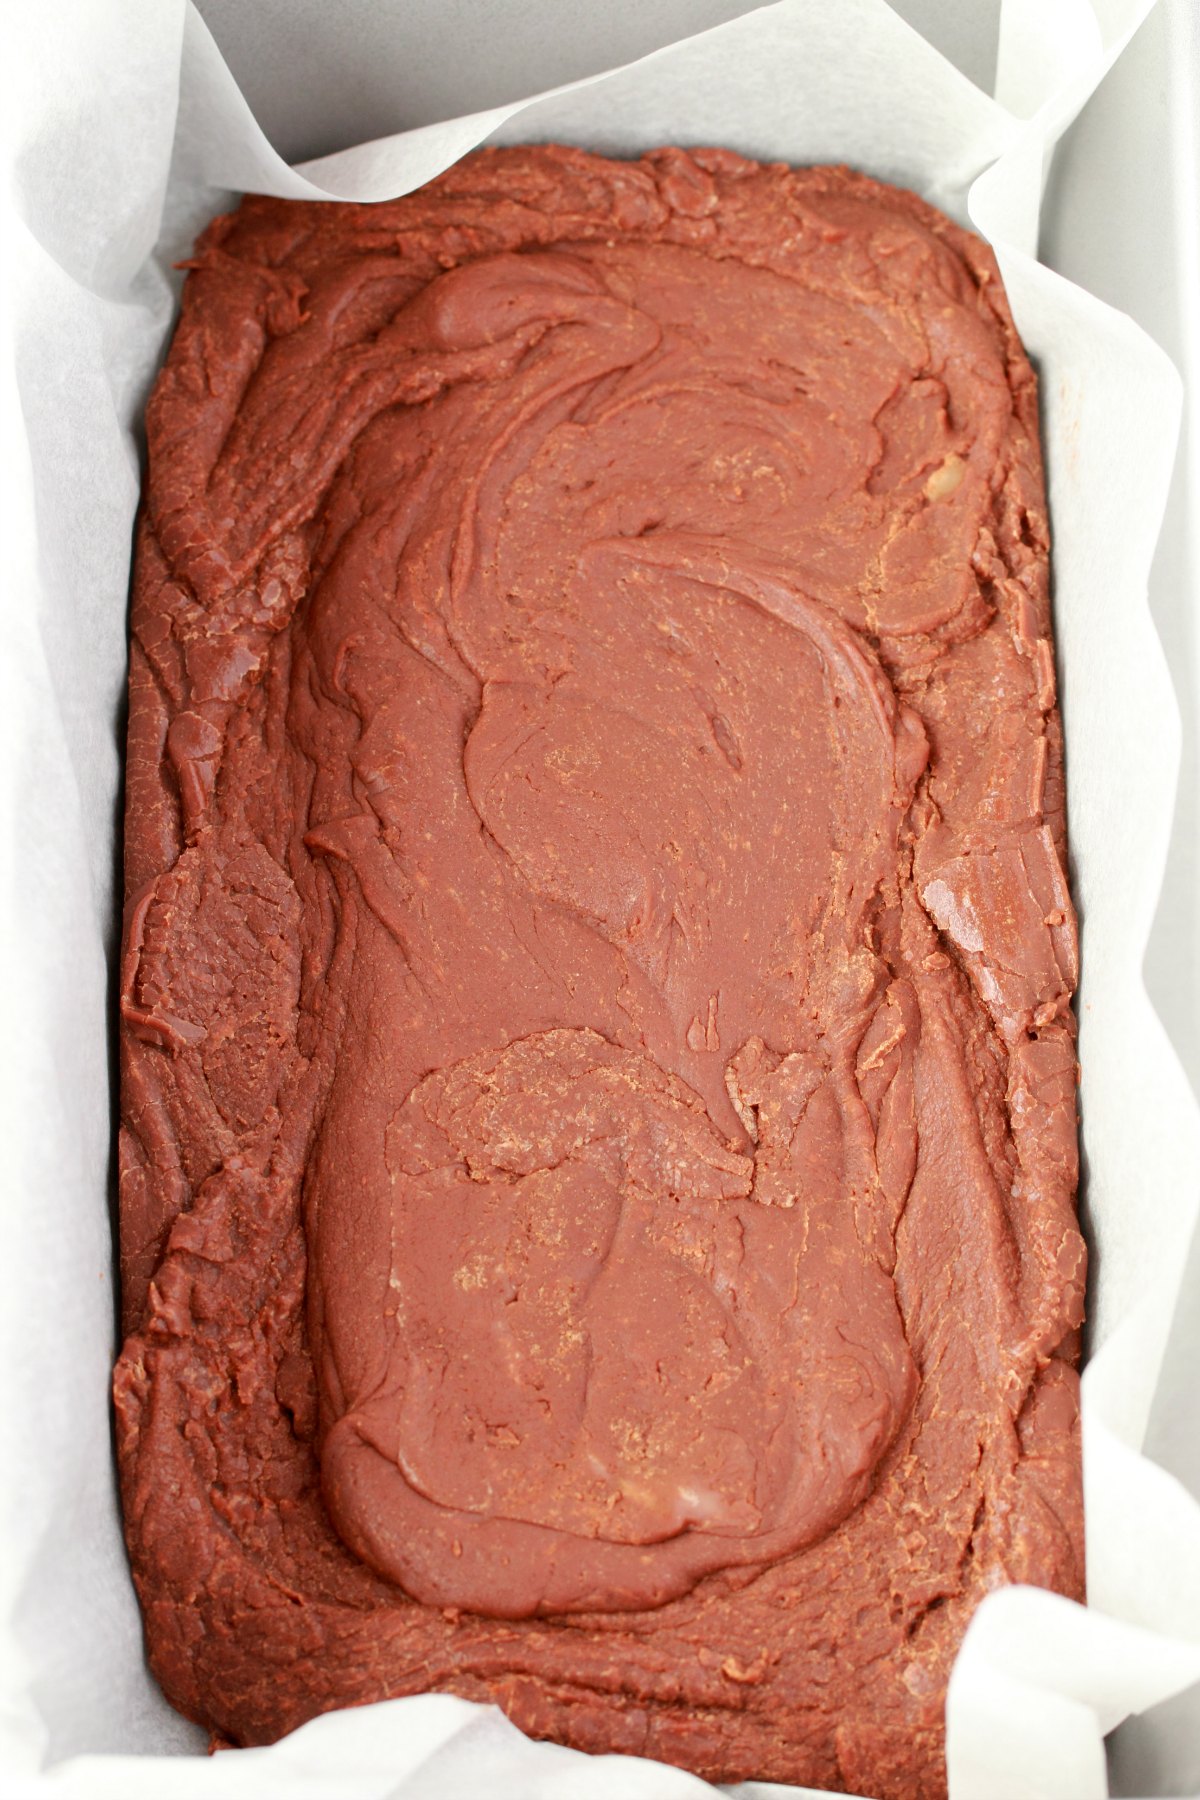 Set fudge in a parchment lined loaf pan. 